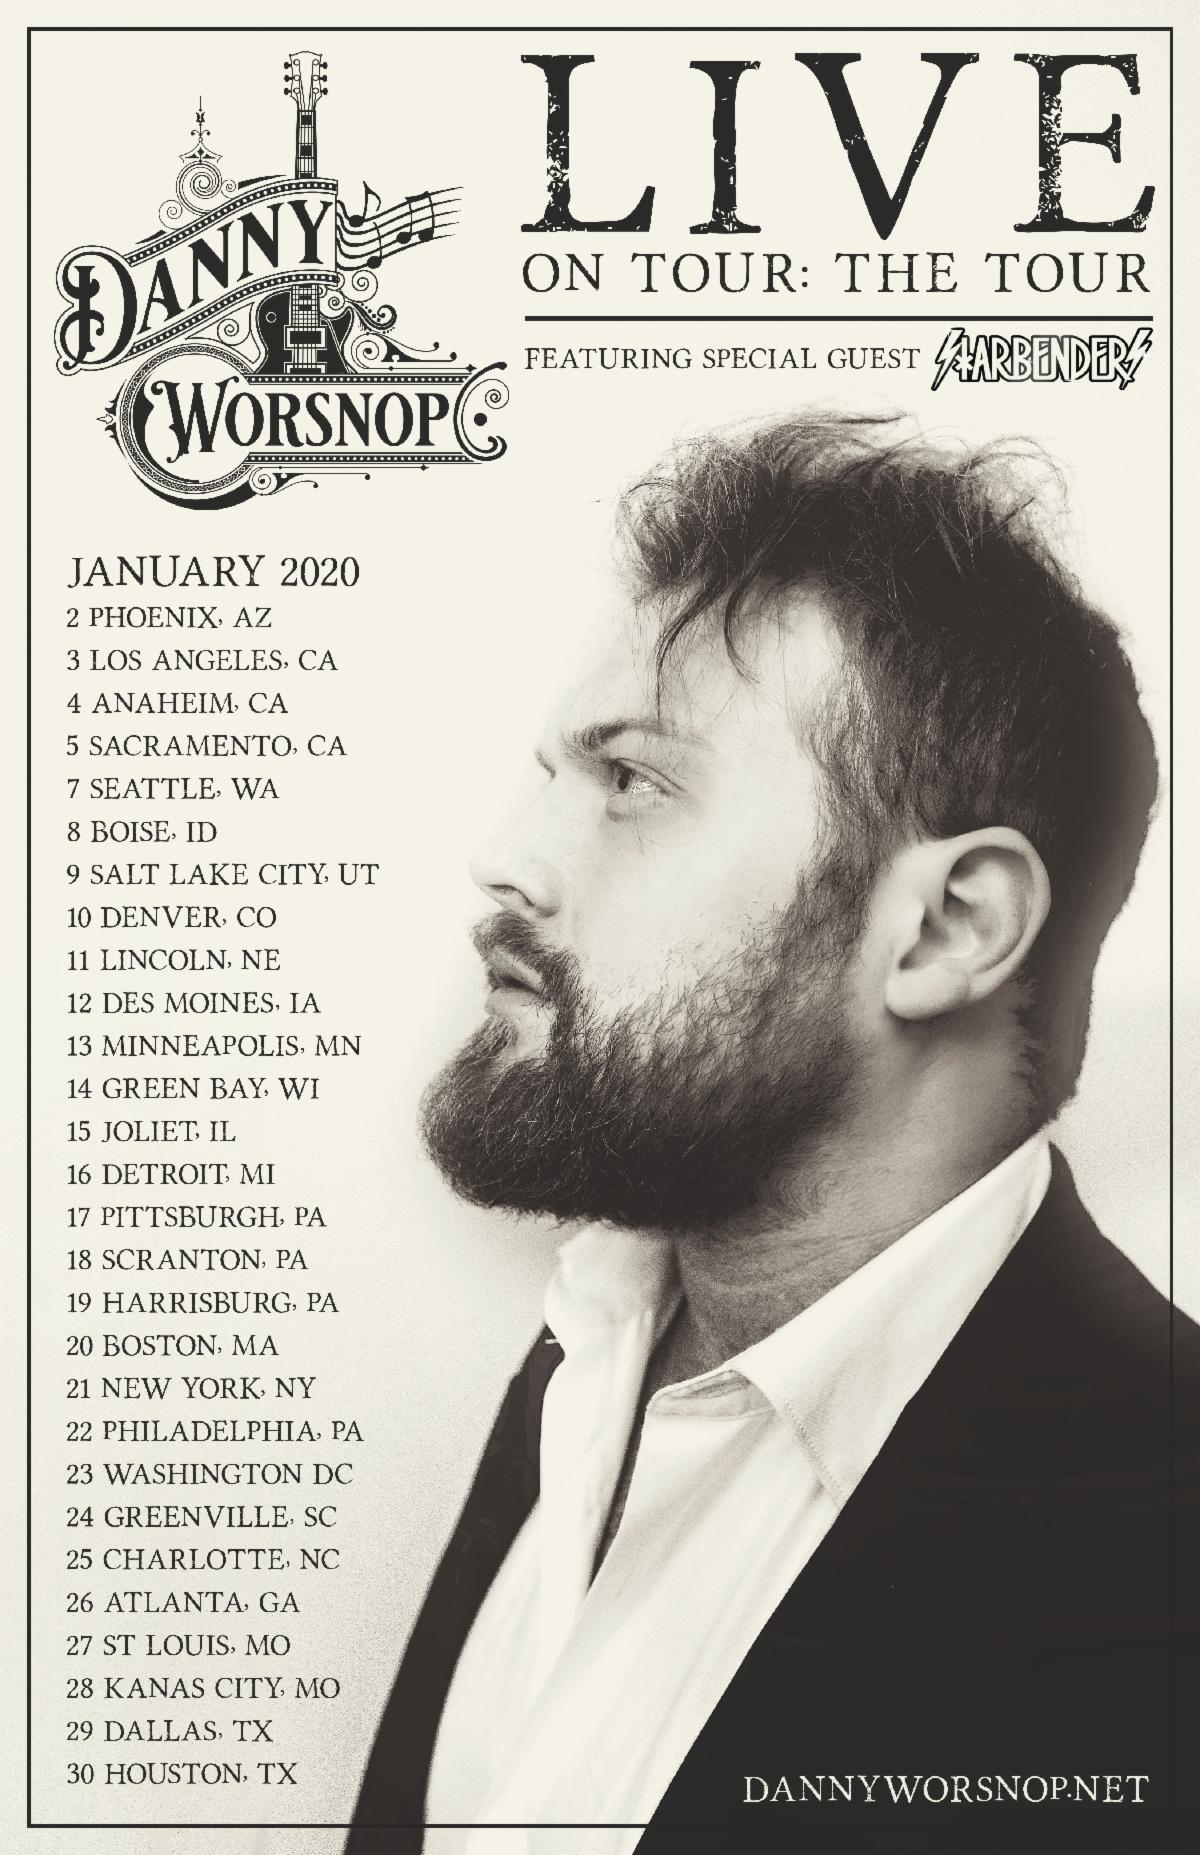 Danny Worsnop Releases New Single 'Another You'